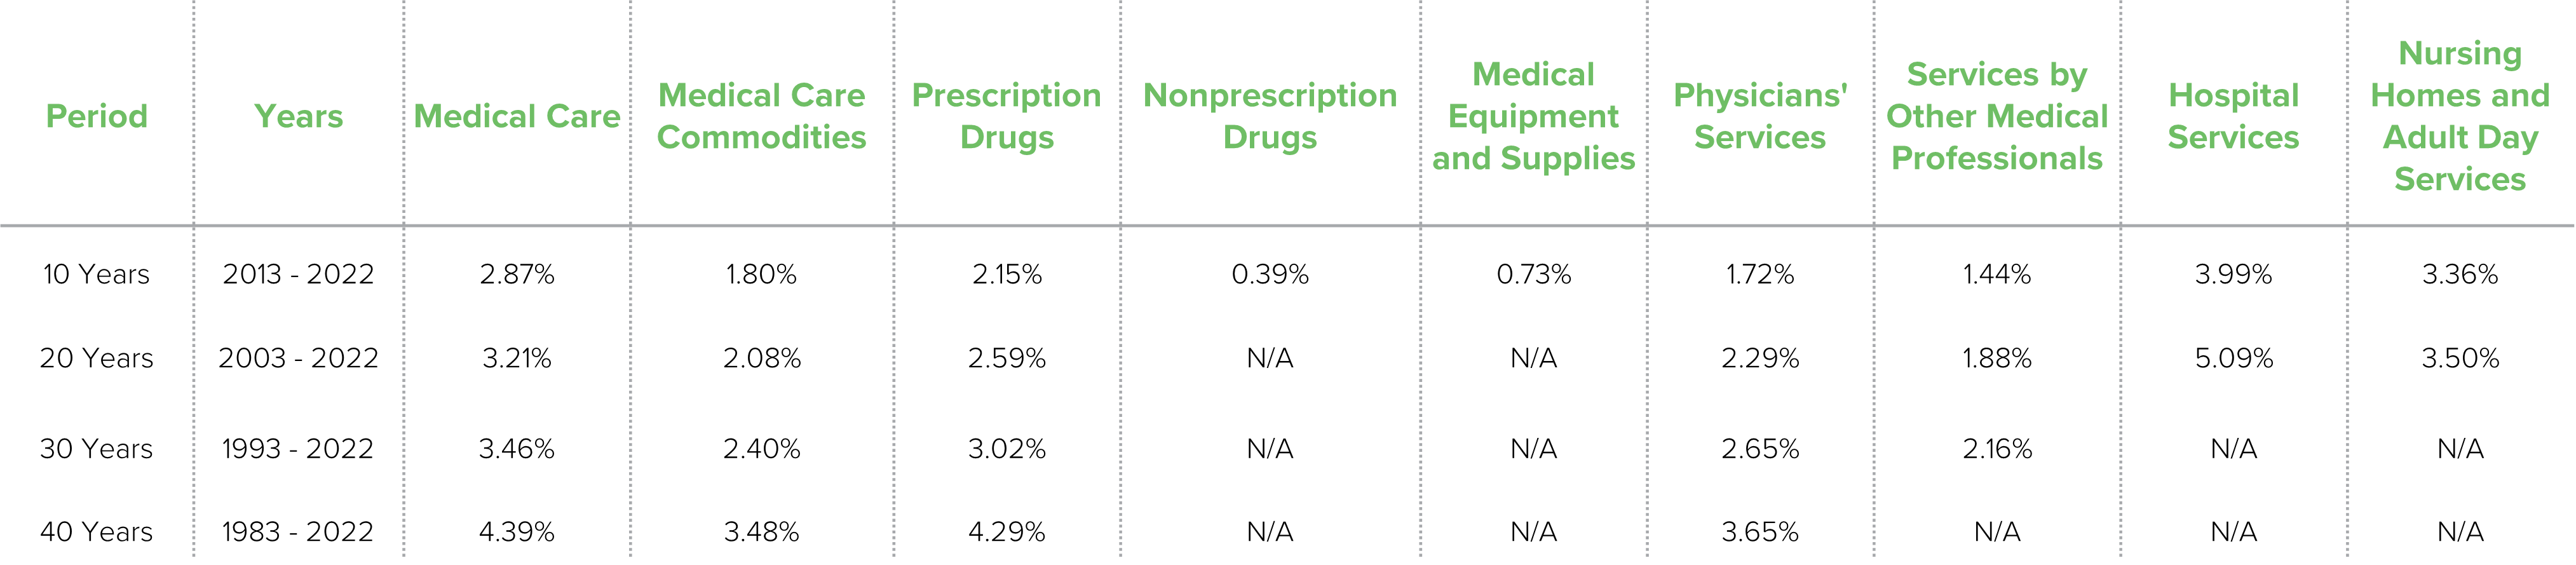 Summary of Commonly Used Categories of Medical Care